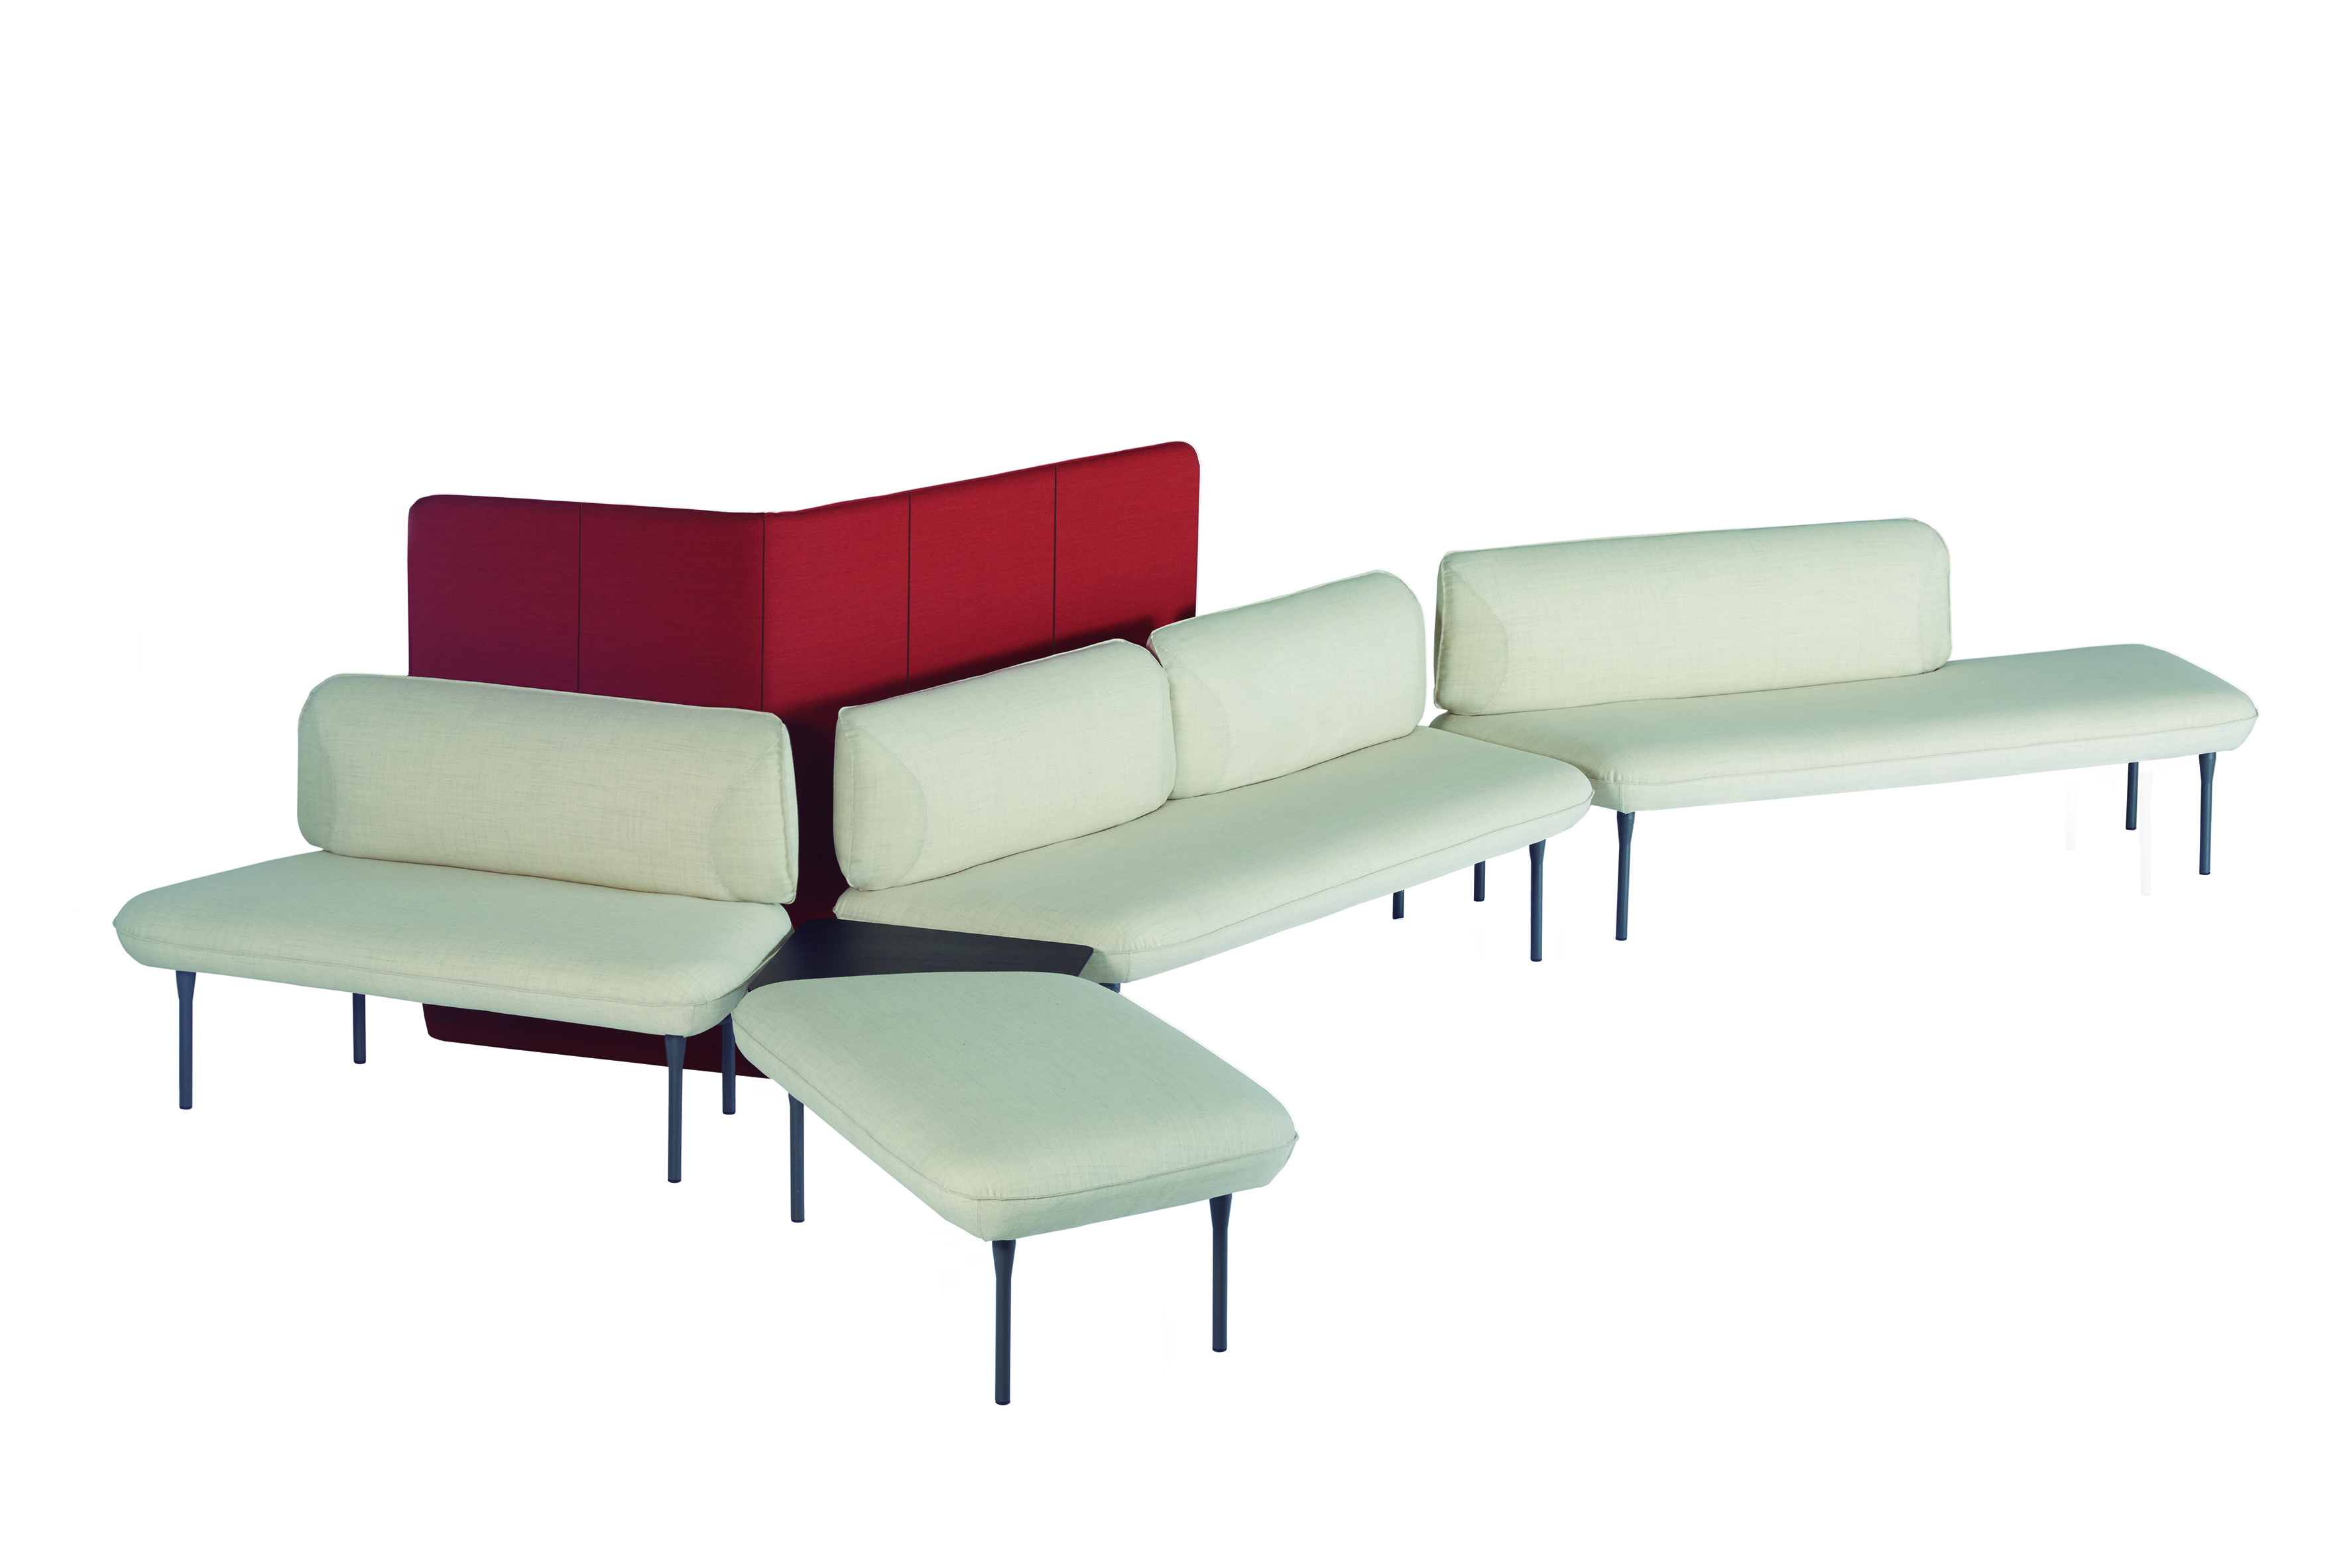 Patrick Norguet Insula seating in white with red privacy panel